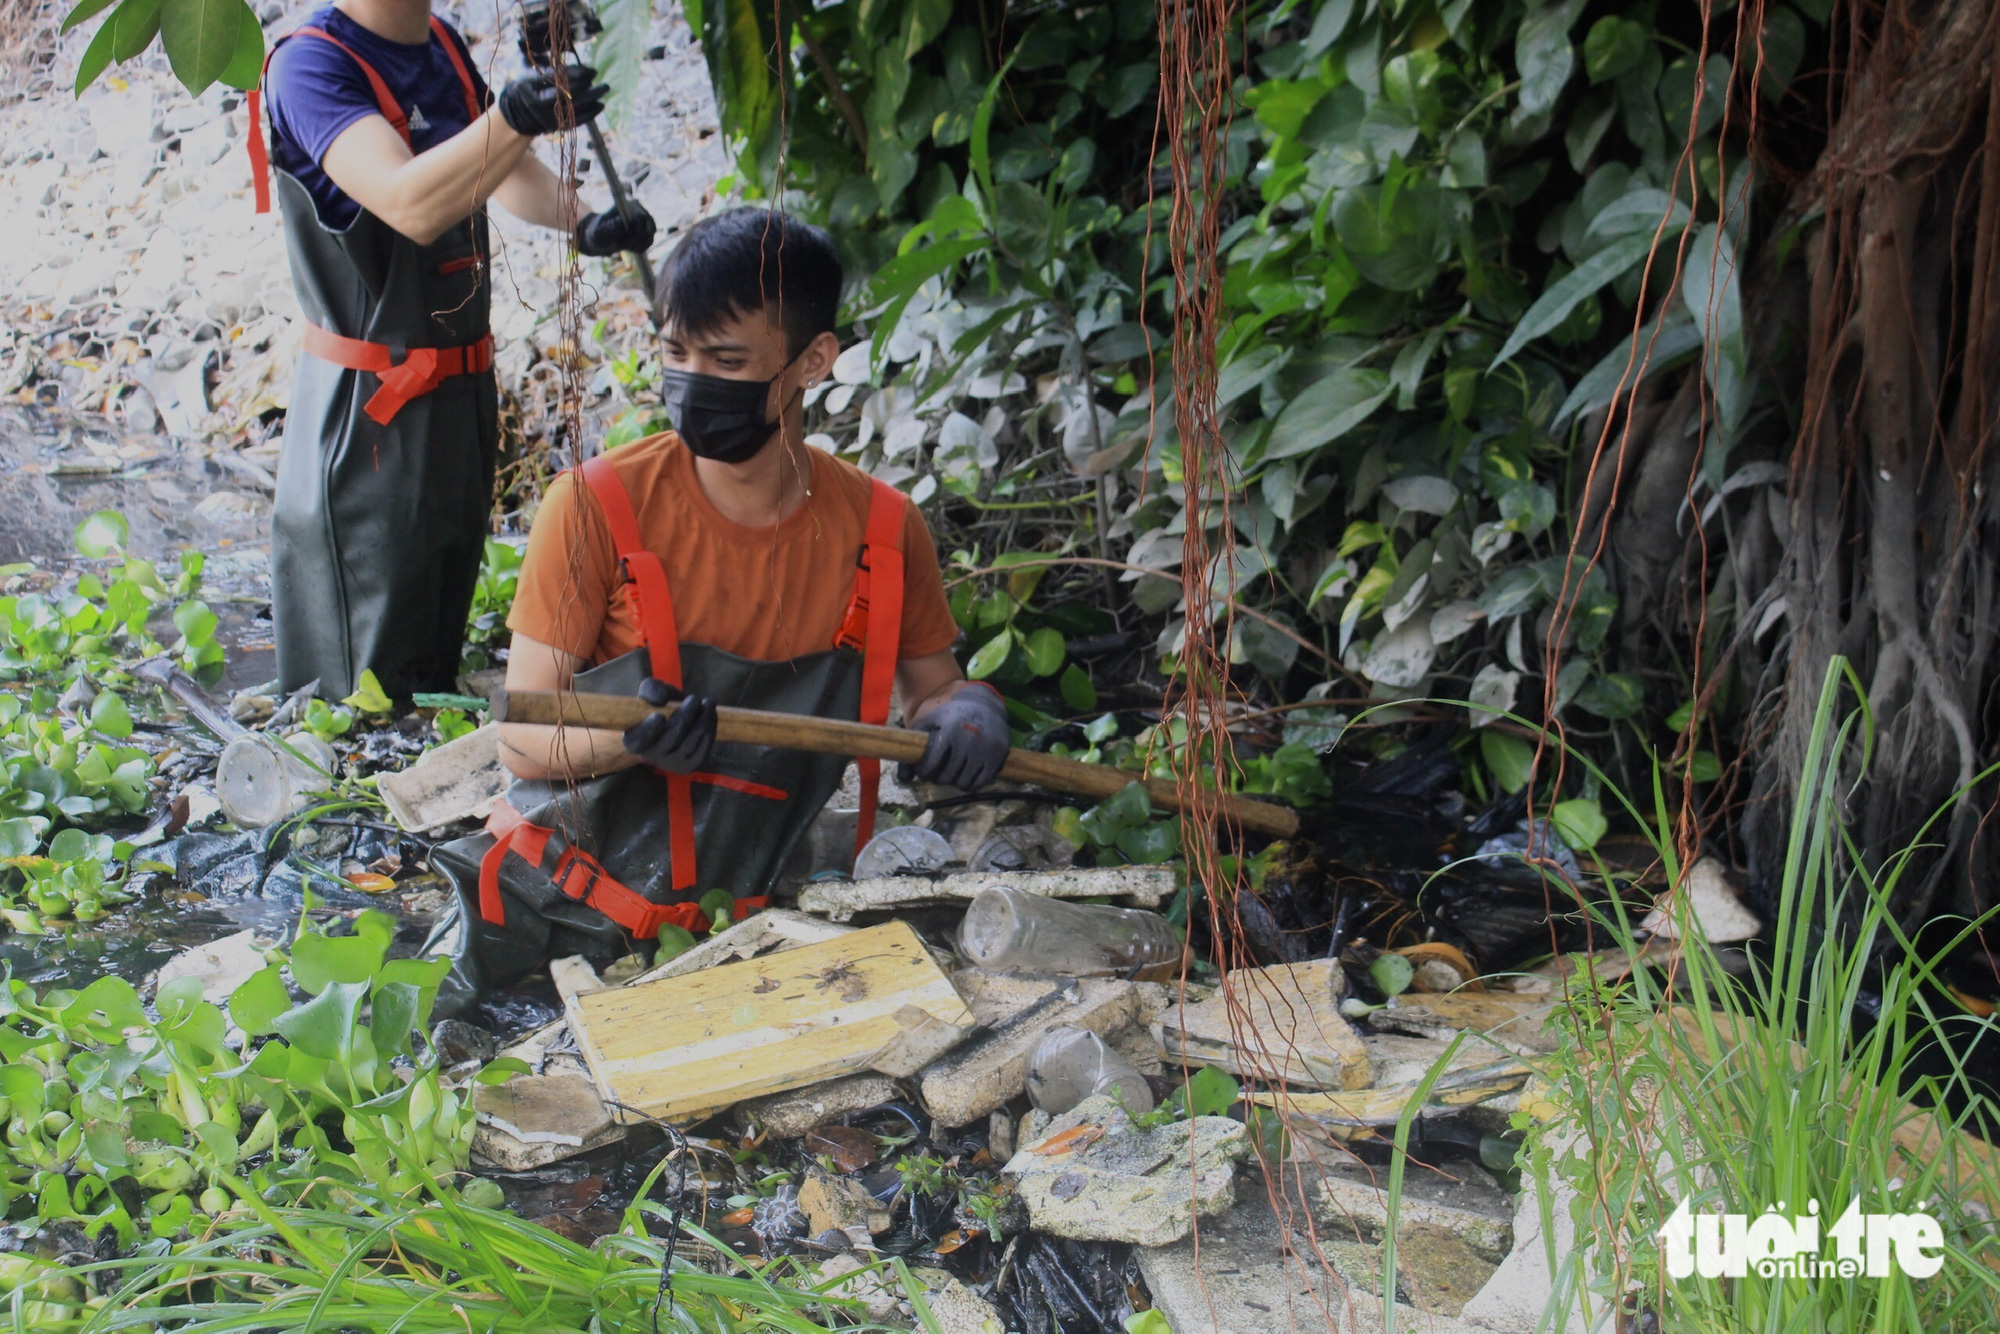 ‘Do not hesitate over filthiness and difficulties’ is the group’s spirit, said Ngo Nhat Duy, a 23-year-old resident in Phu Yen Province, central Vietnam, and a member of the Sai Gon Xanh squad.